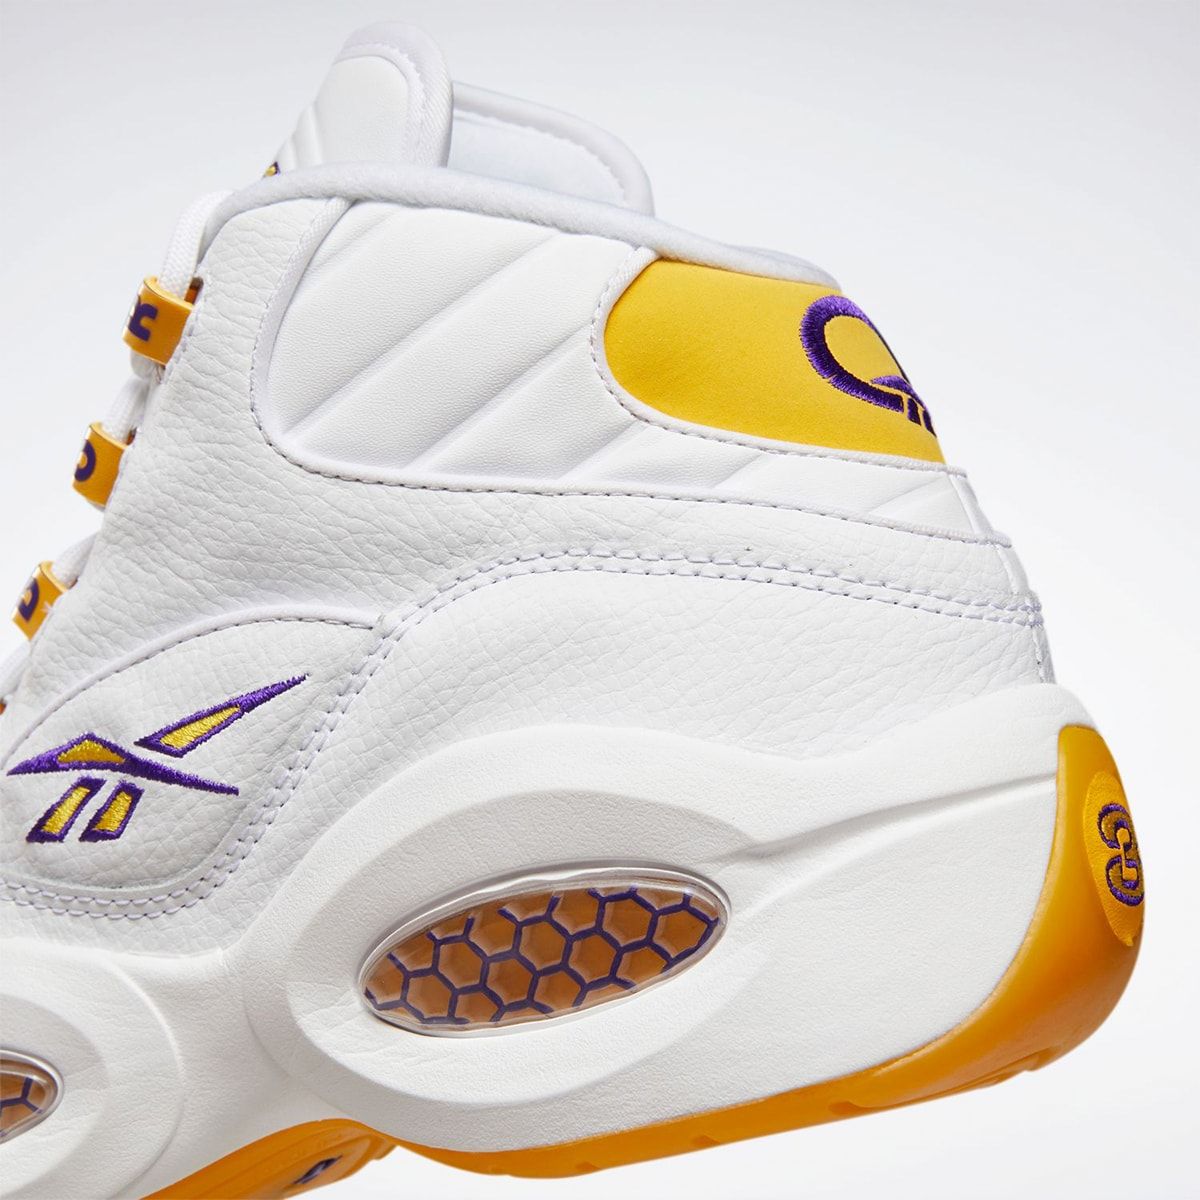 Where to Buy the Reebok Question Mid “Kobe” Restock | House of Heat°